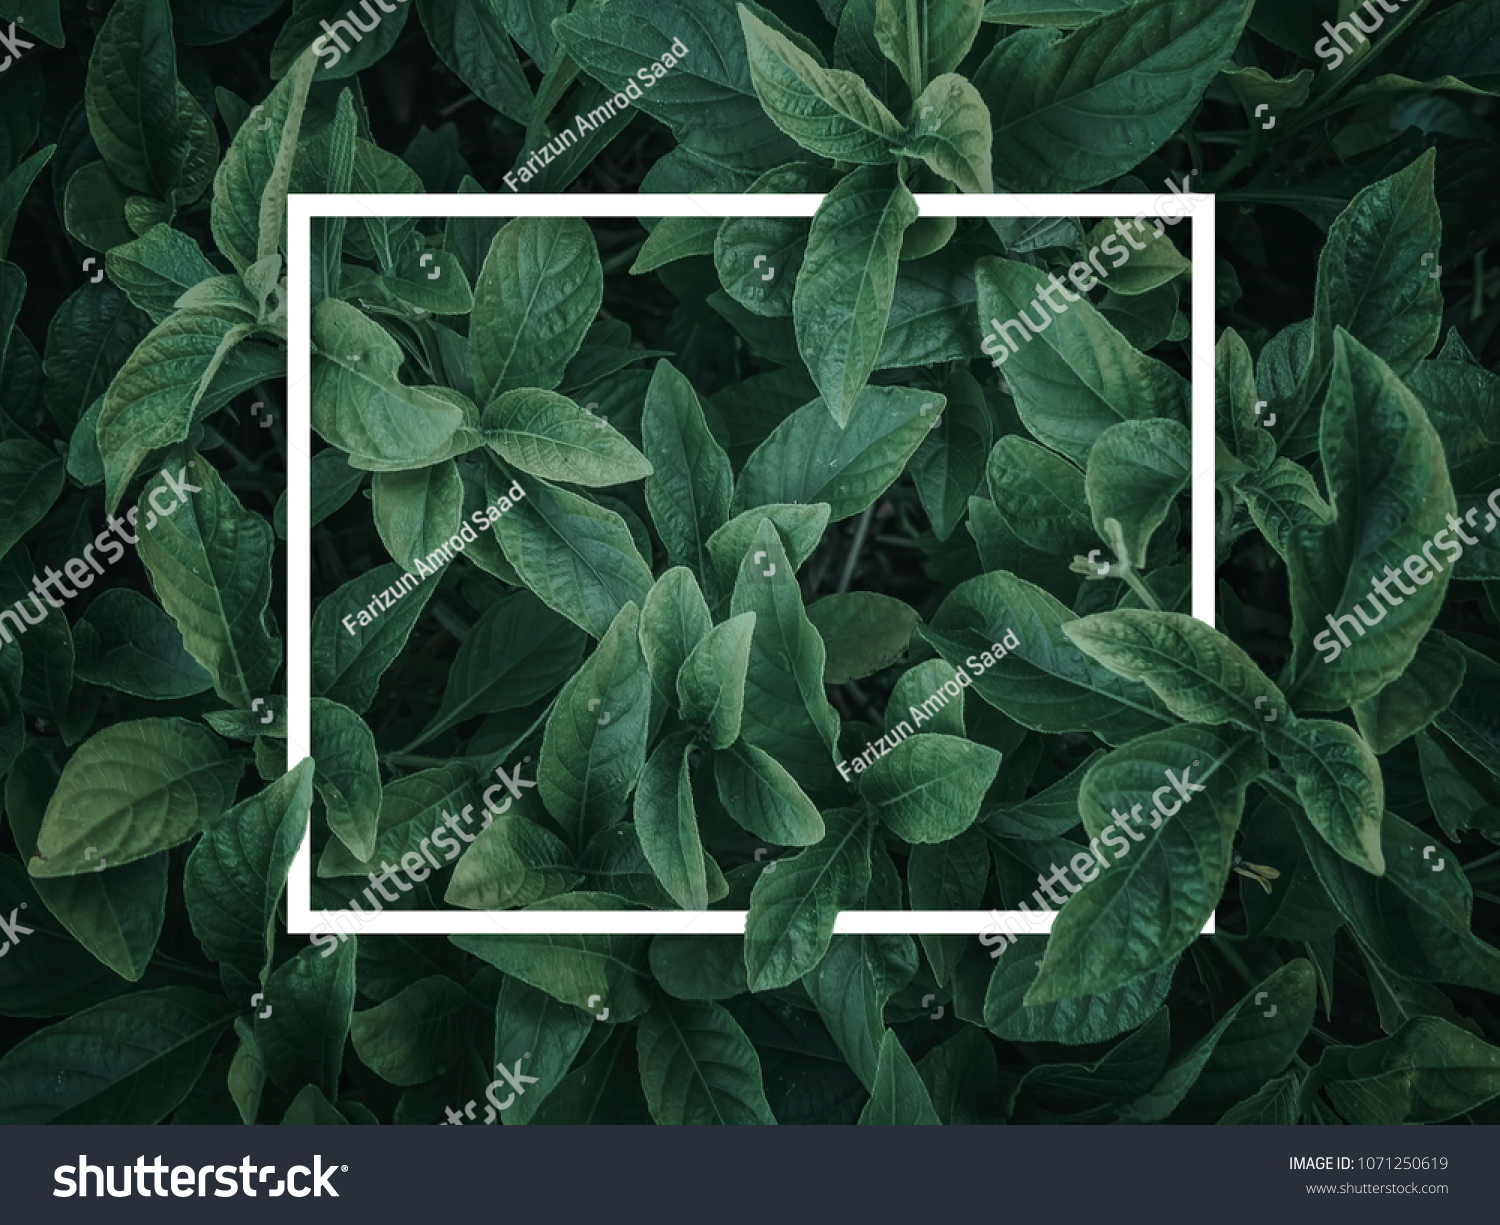 Creative layout made of leaves with paper card note. Nature concept. Green leaf texture. Leaf texture background
 #1071250619